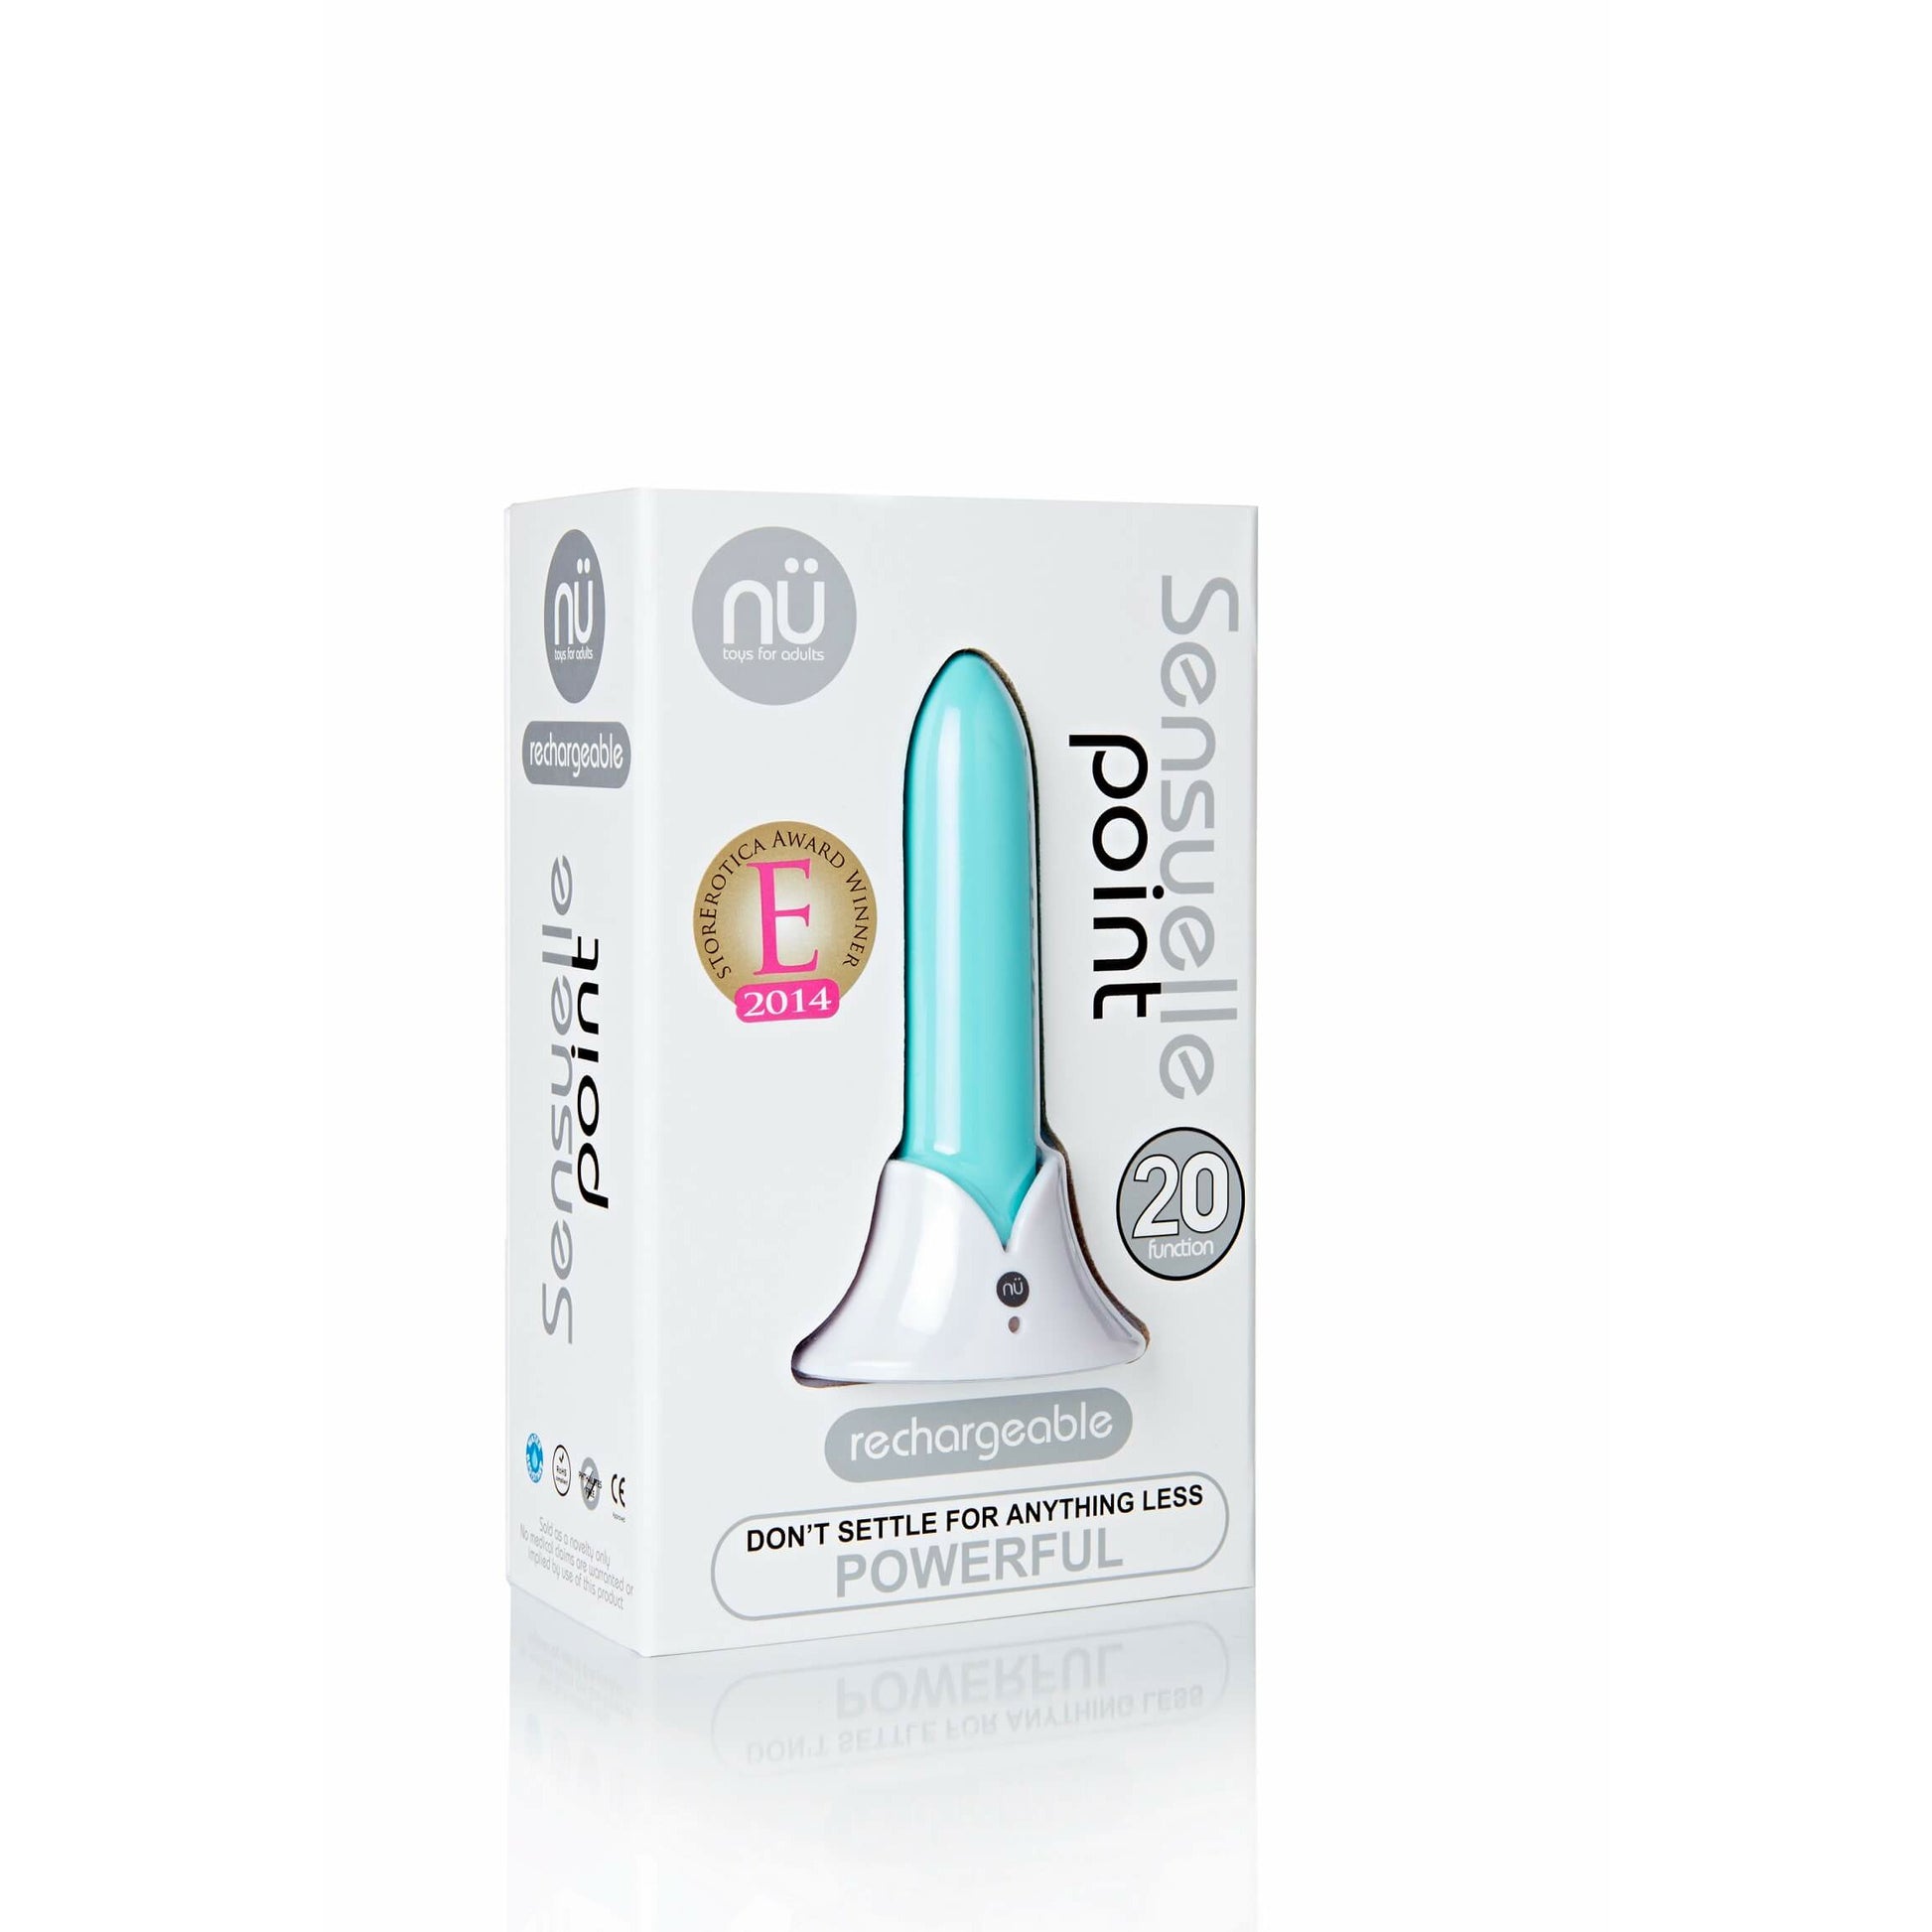 NU Sensuelle Point 20 Function Bullet - The Bigger O online sex toy shop USA, Canada & UK shipping available